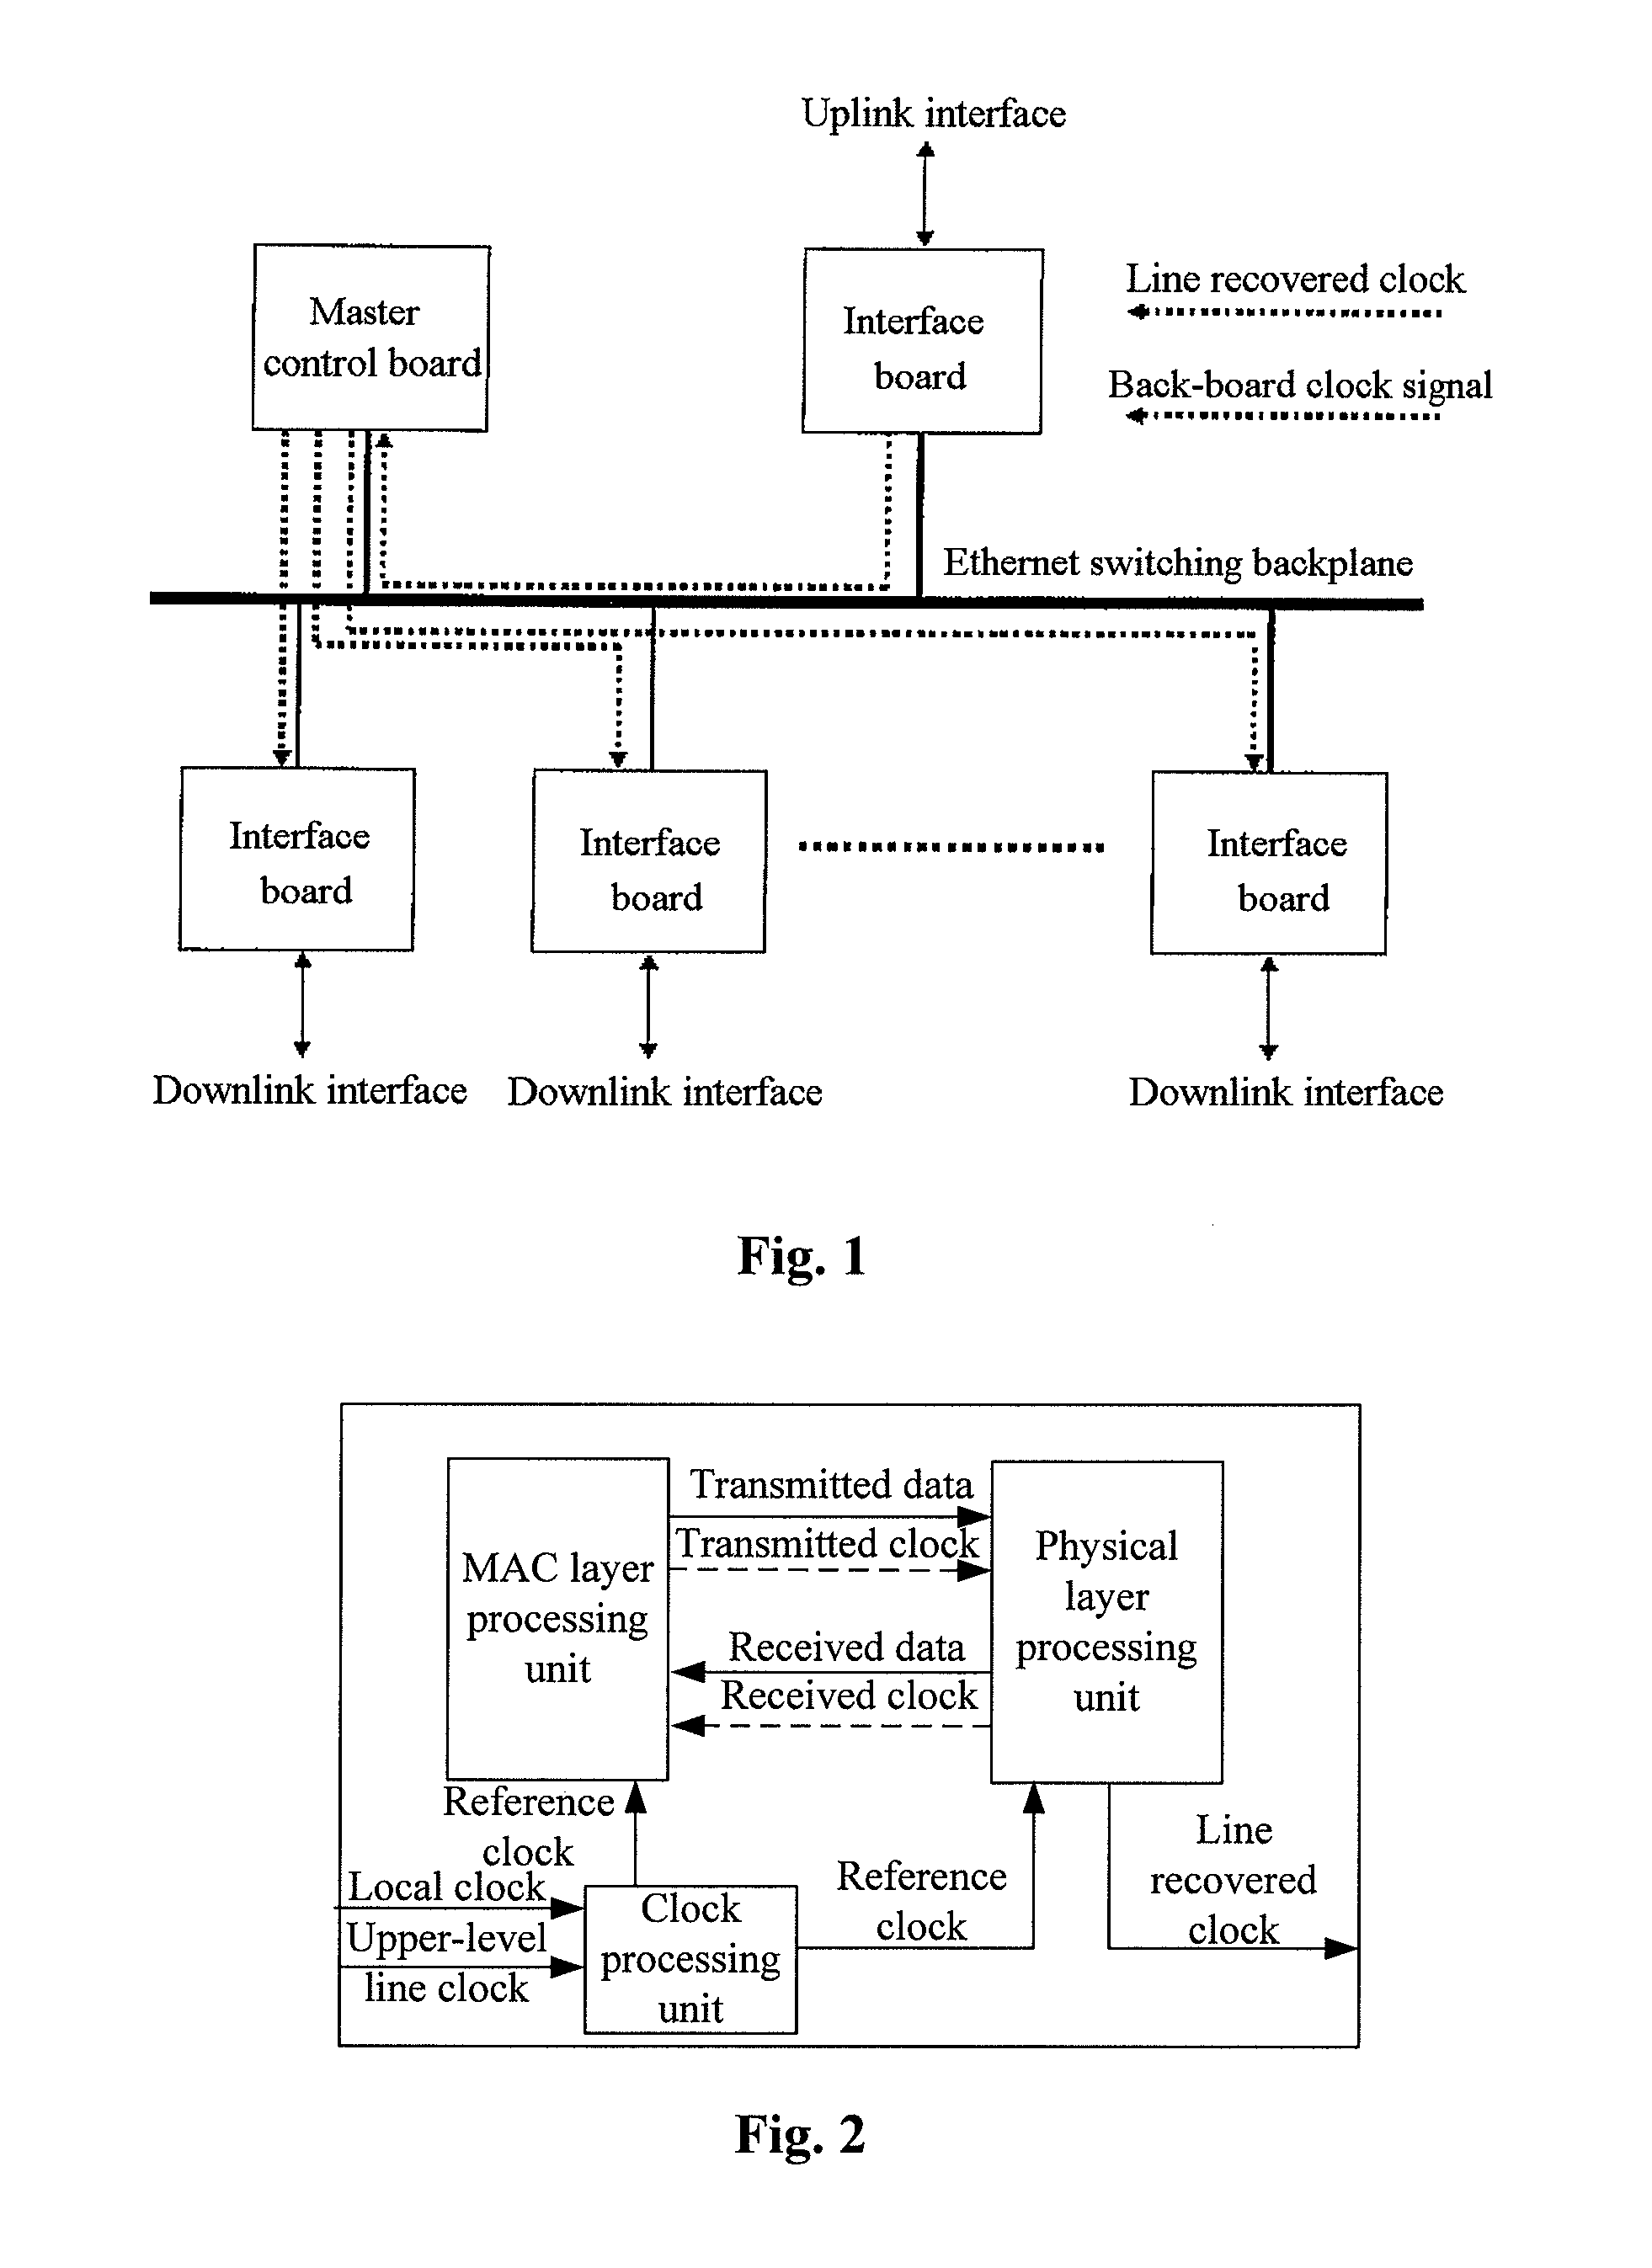 System and method for realizing network synchronization by packet network